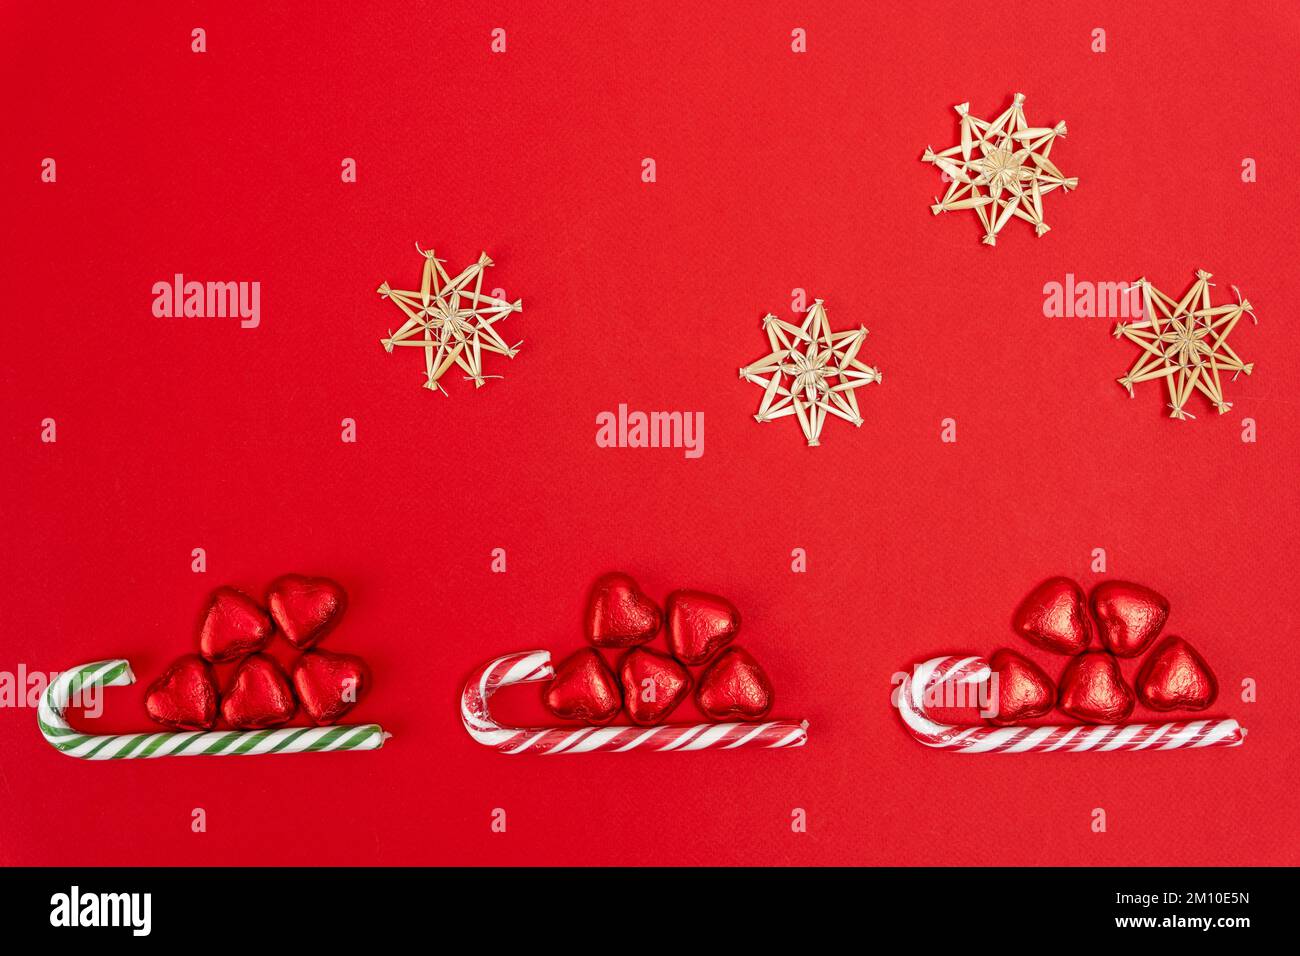 Christmas background with a sled, candy and a caramel cane Stock Photo